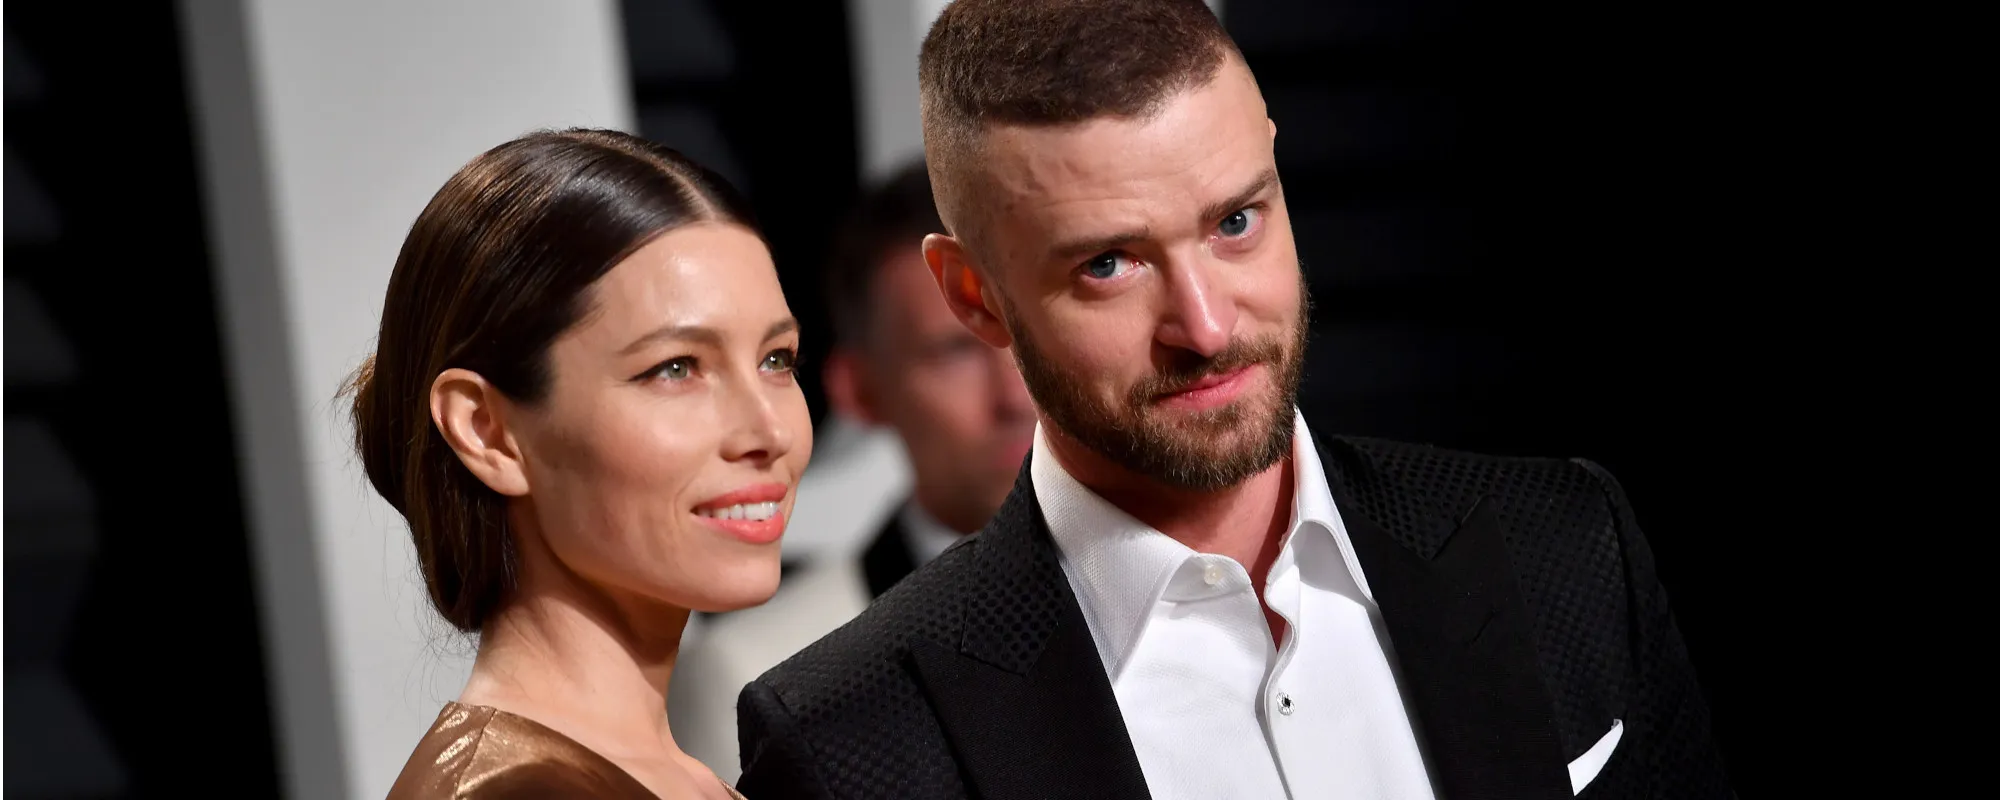 Justin Timberlake Channels His Inner Conor McGregor With Apparent Britney Spears Clapback